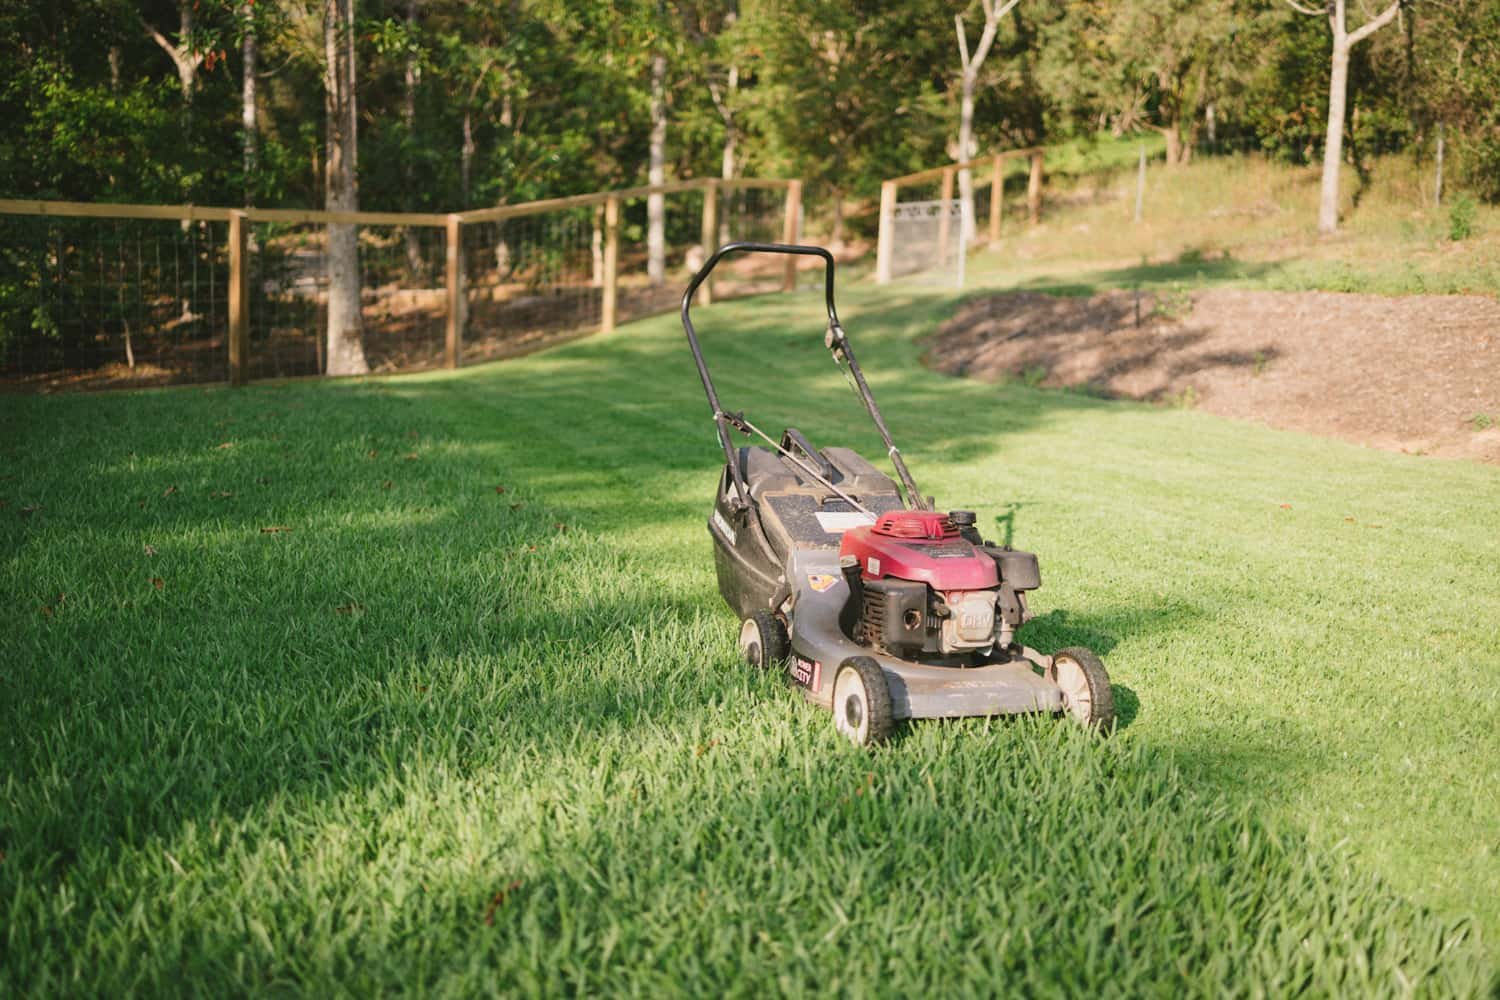 Factors Affecting Mowing Time